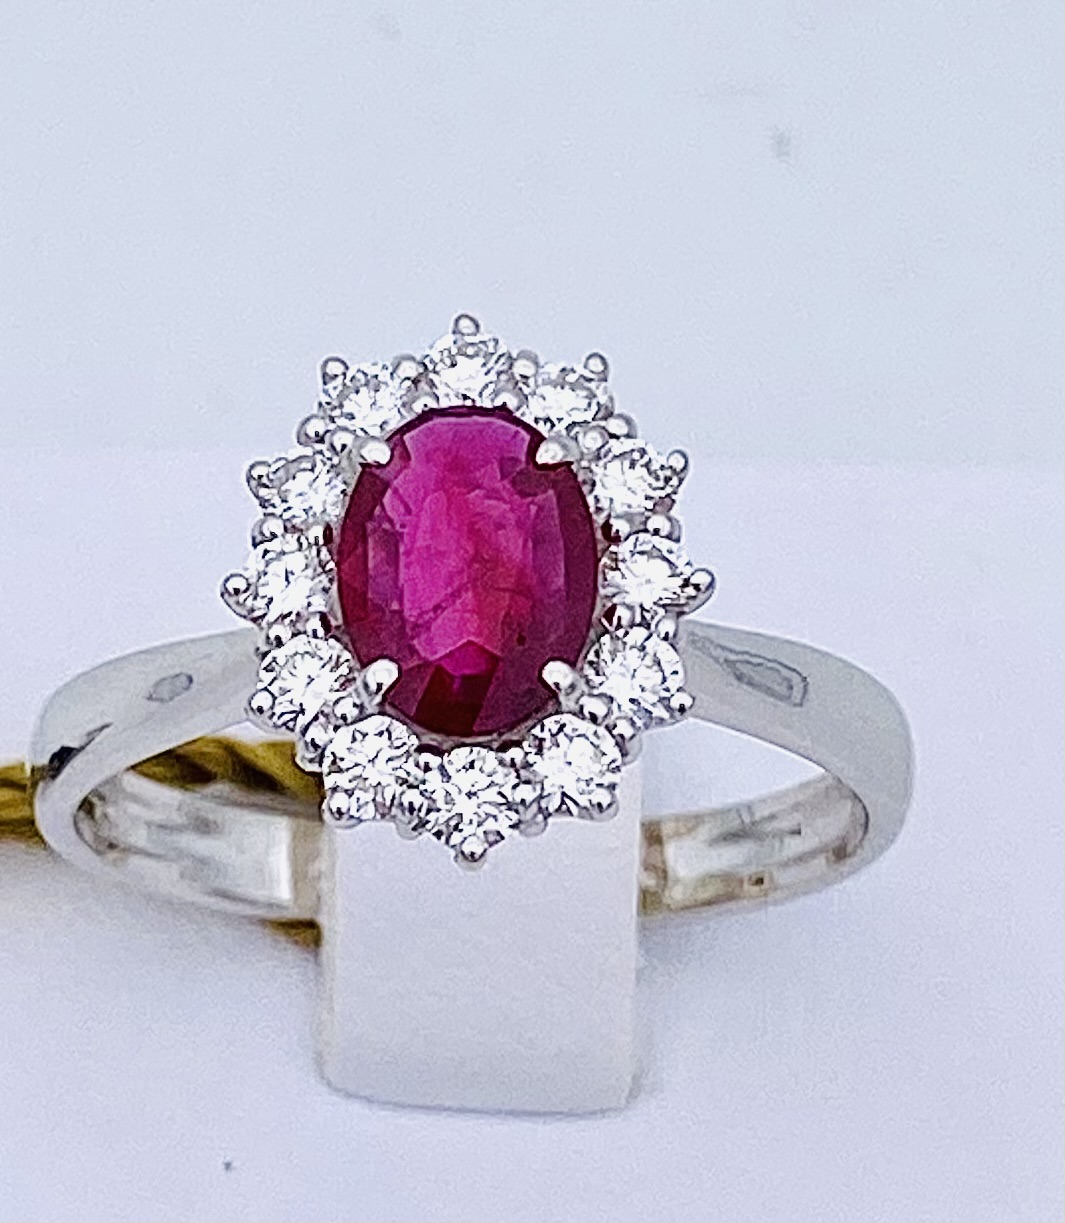 RUBY AND DIAMOND RING 750% GOLD ART. AN1005